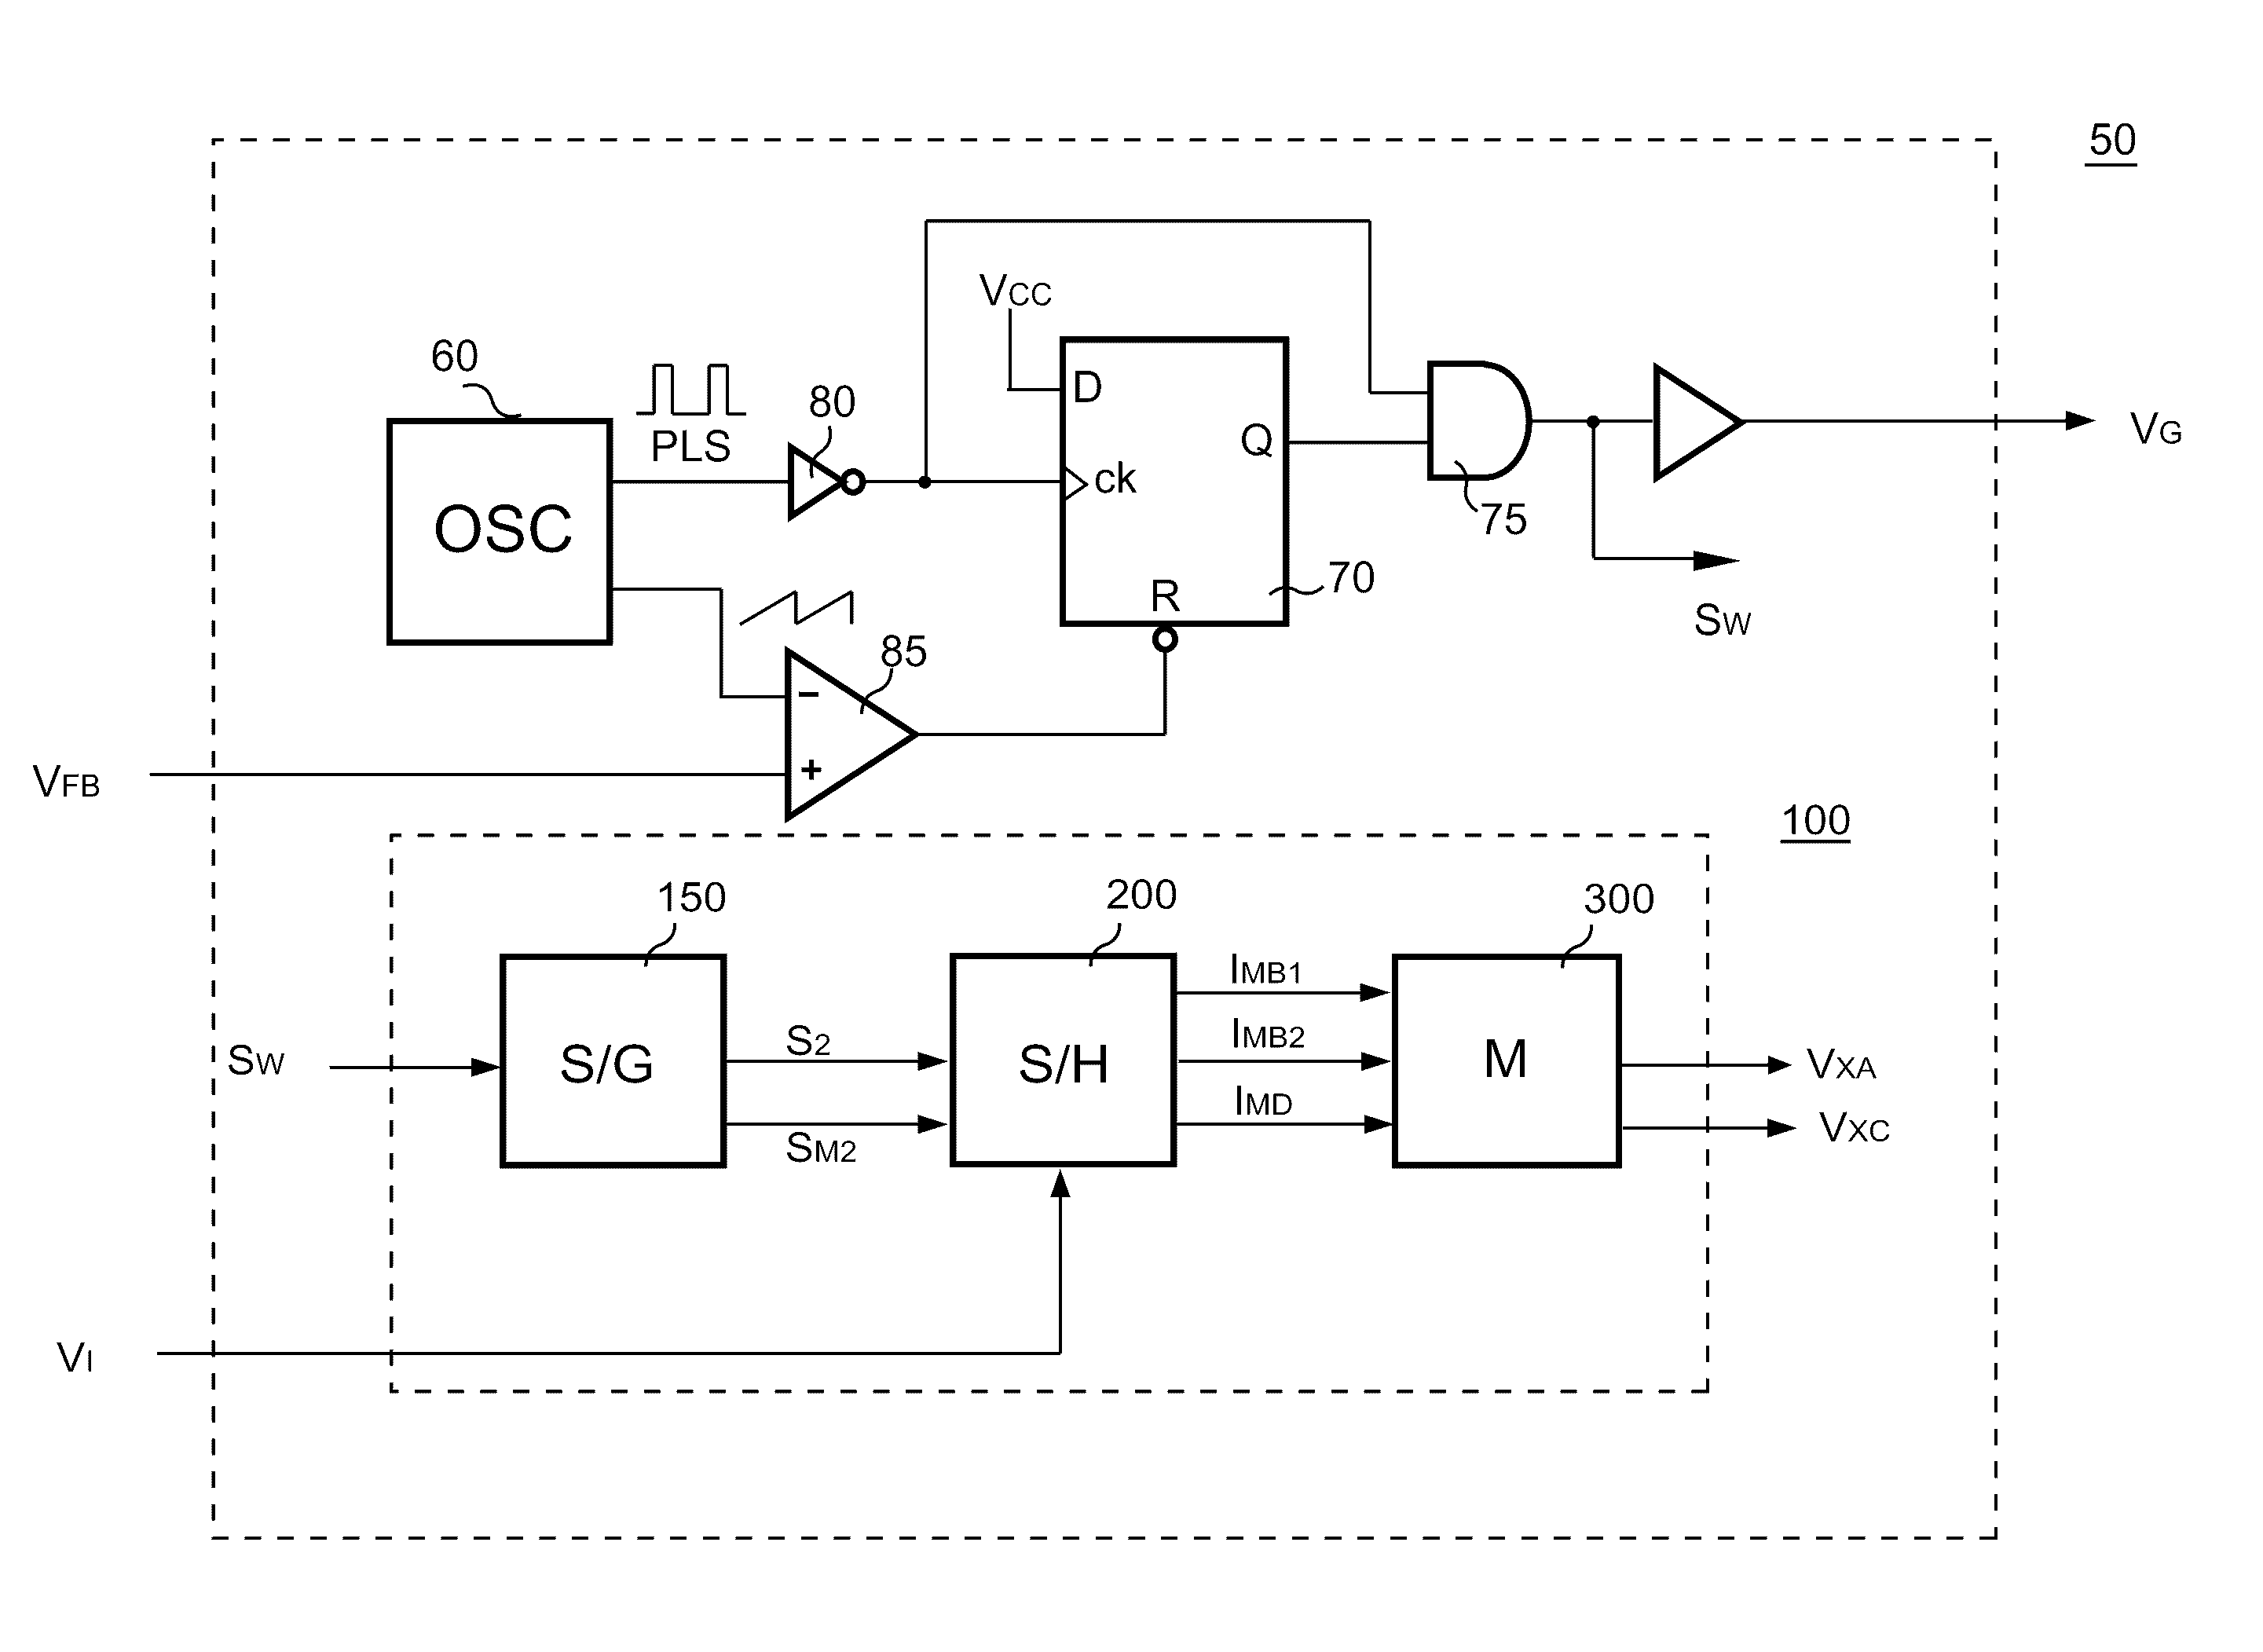 Method and apparatus for measuring the switching current of power converter operated at continuous current mode